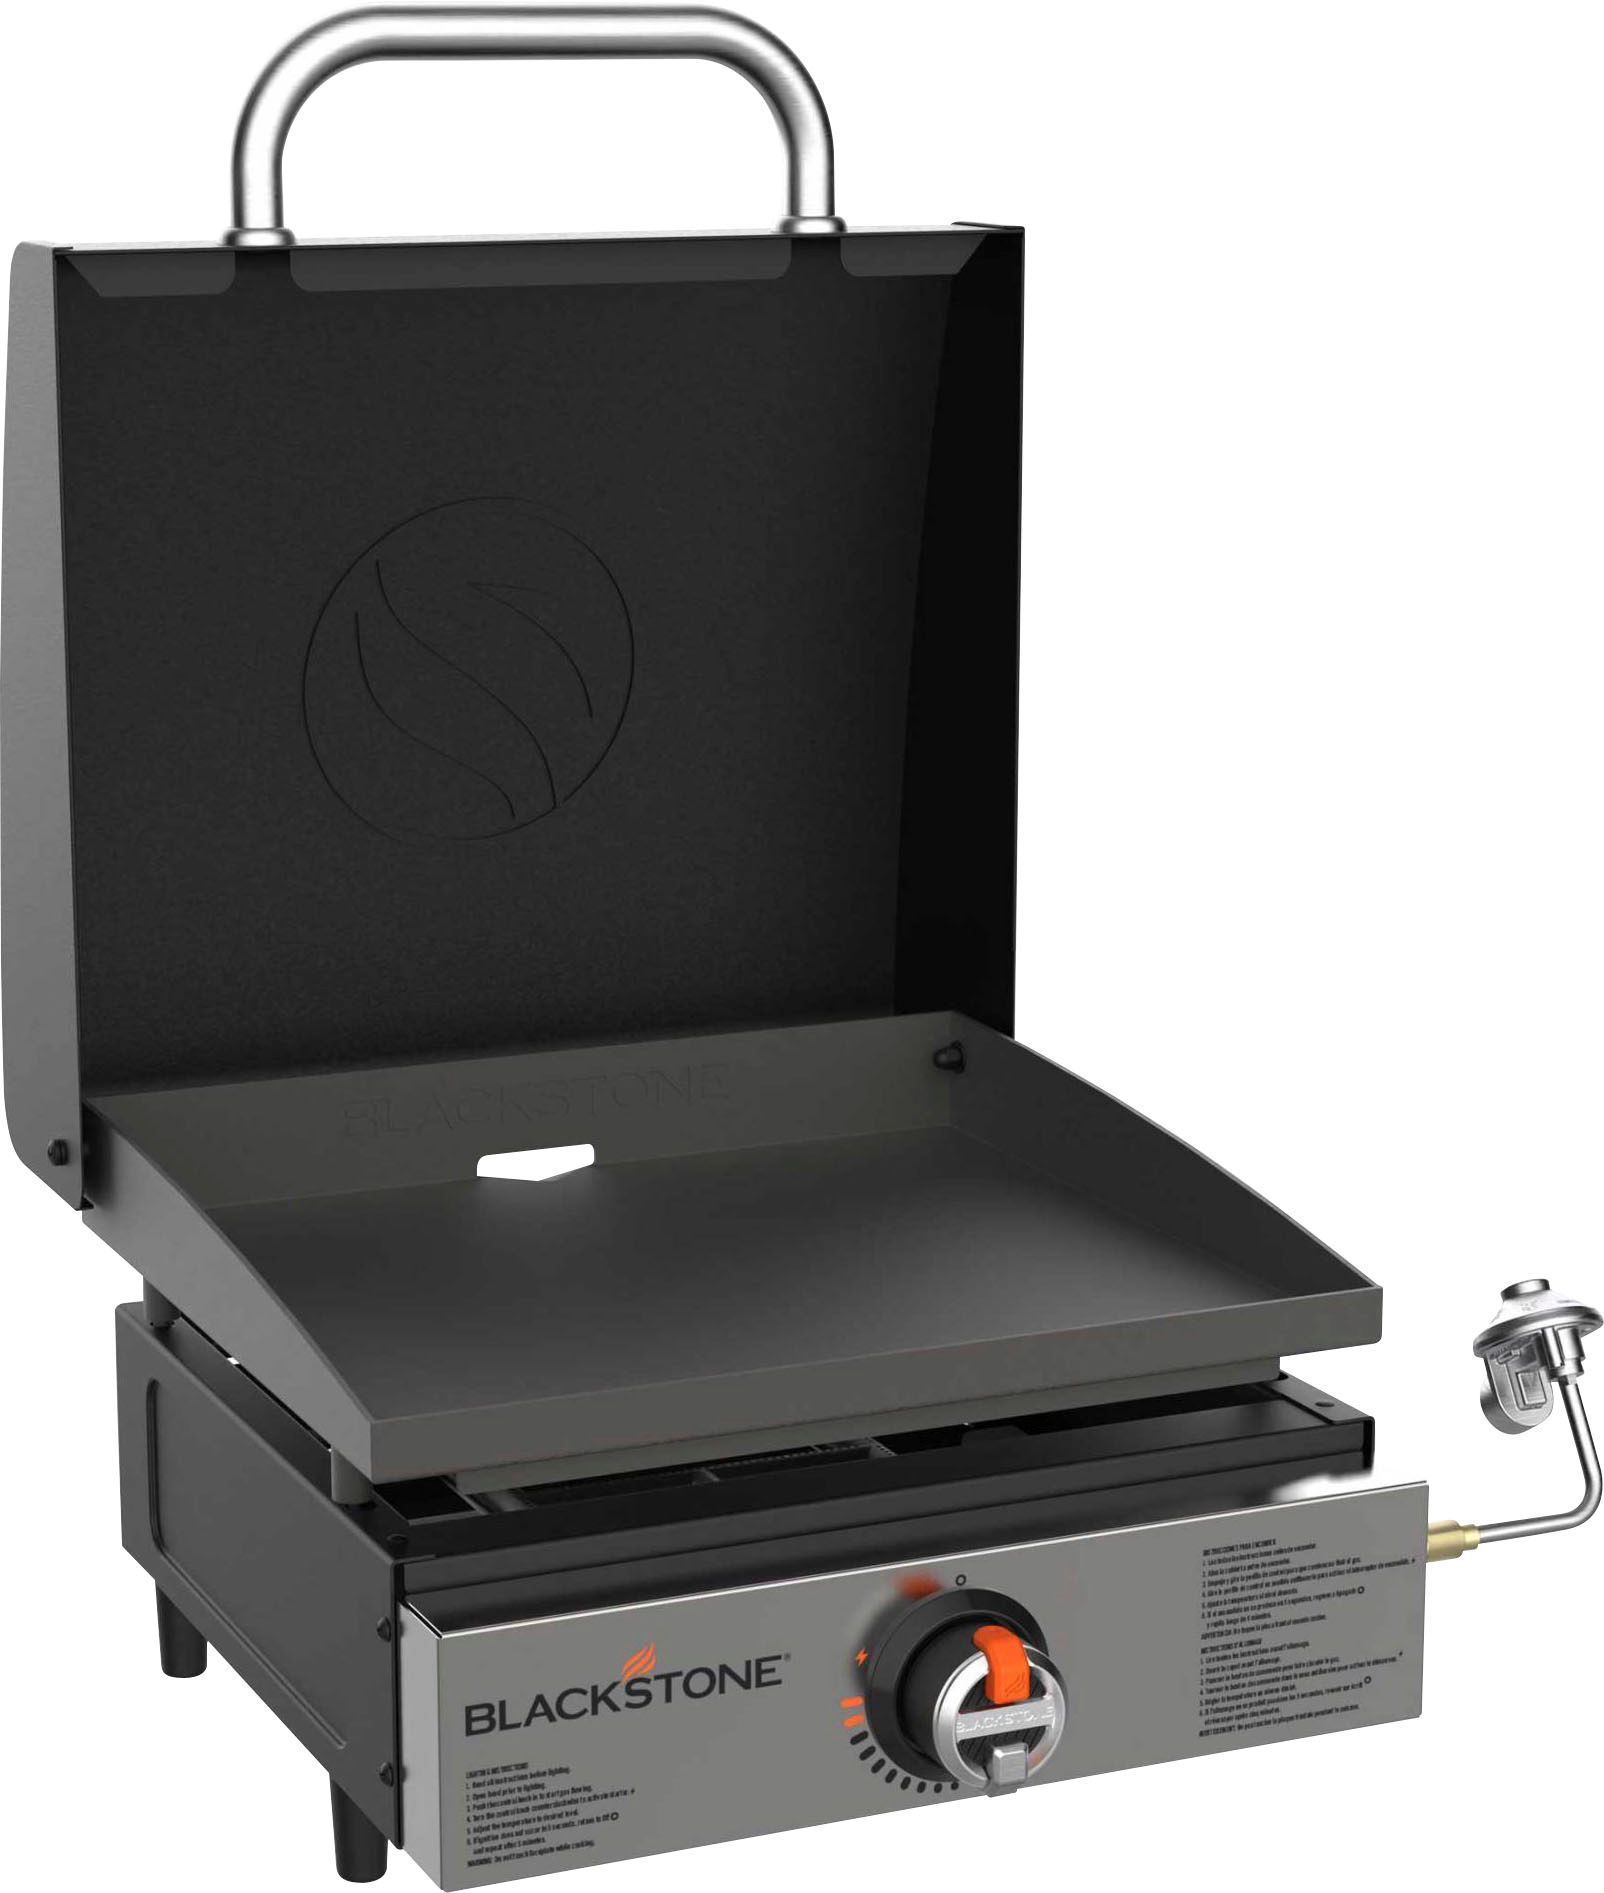 Angle View: Blackstone - 17-in. Countertop Outdoor Griddle with Hood - Black